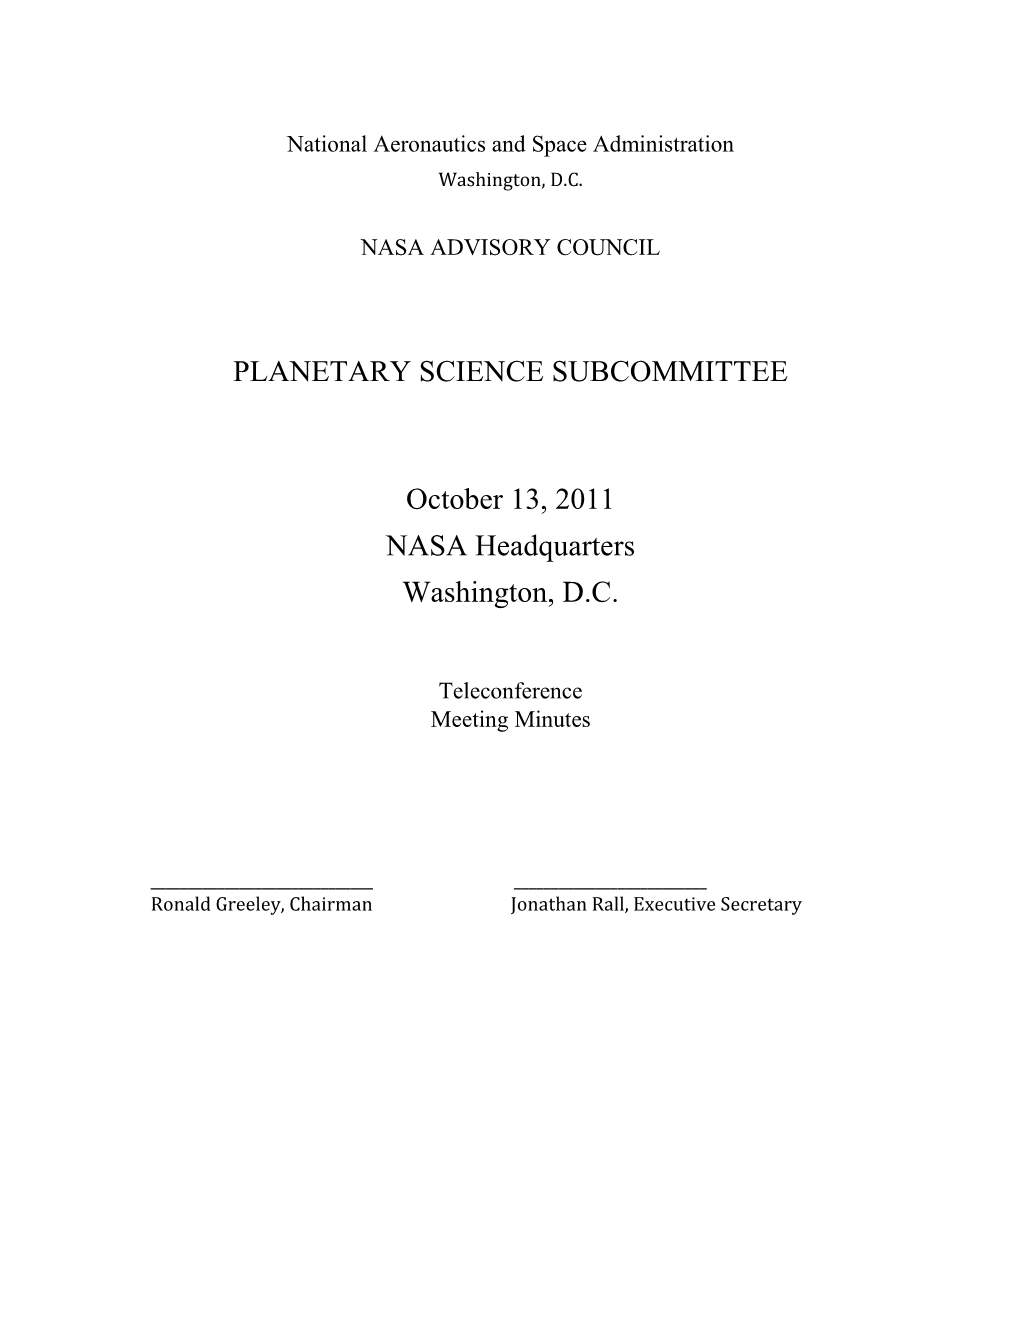 PLANETARY SCIENCE SUBCOMMITTEE October 13, 2011